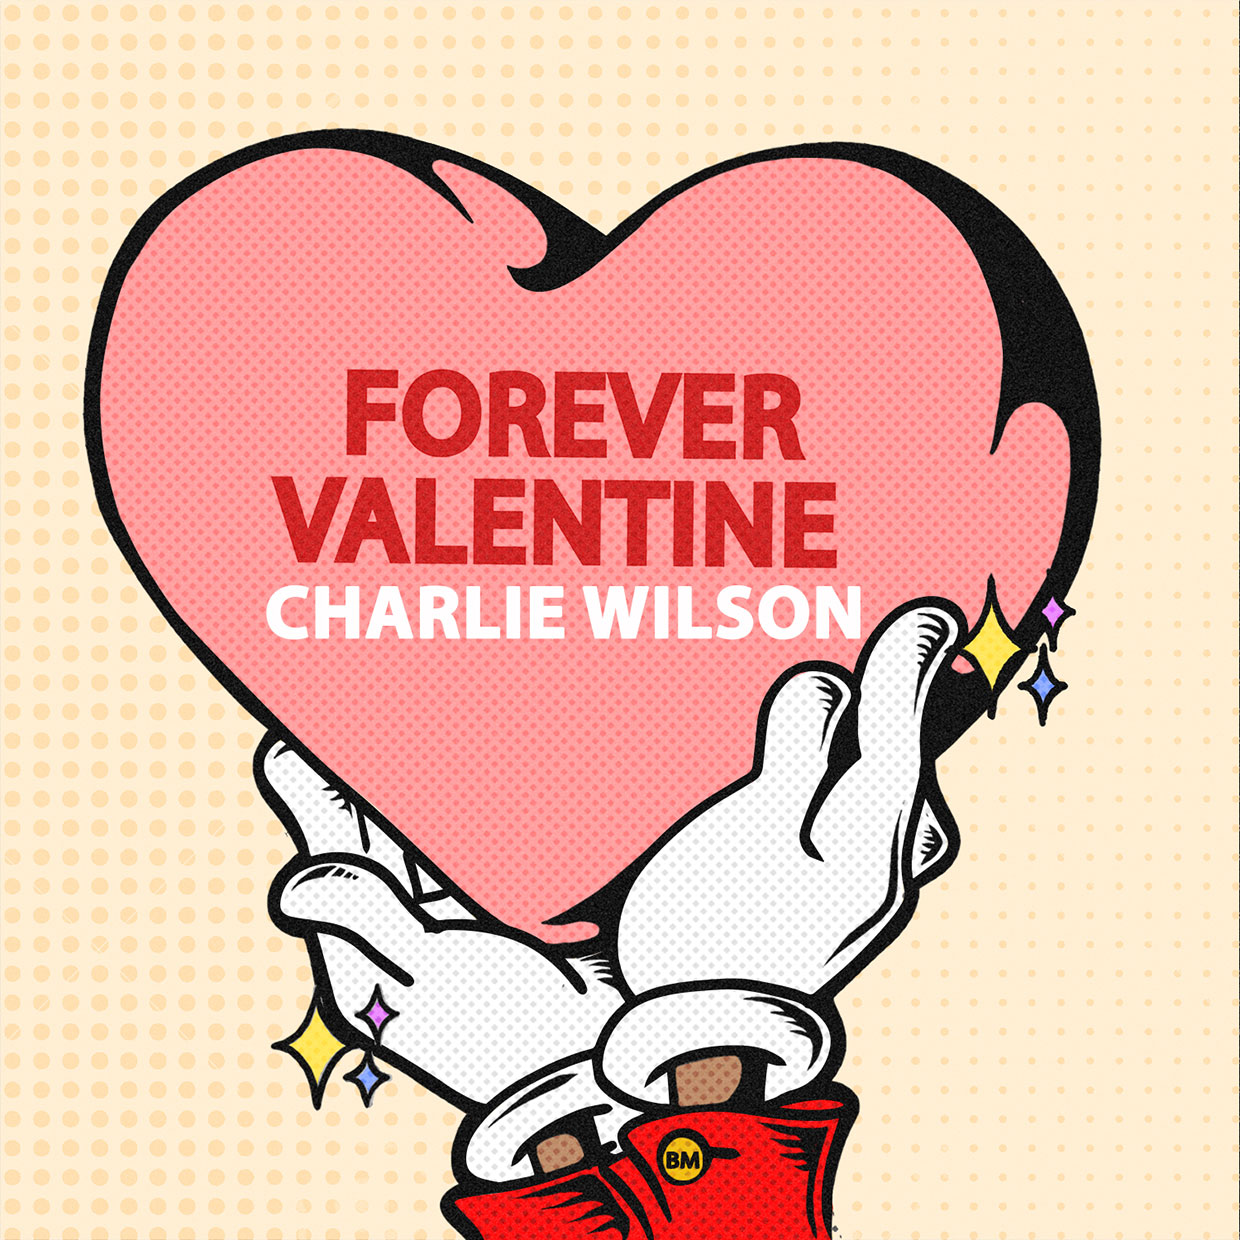 Charlie Wilson Releases New Single "Forever Valentine" Co-Written by Bruno Mars